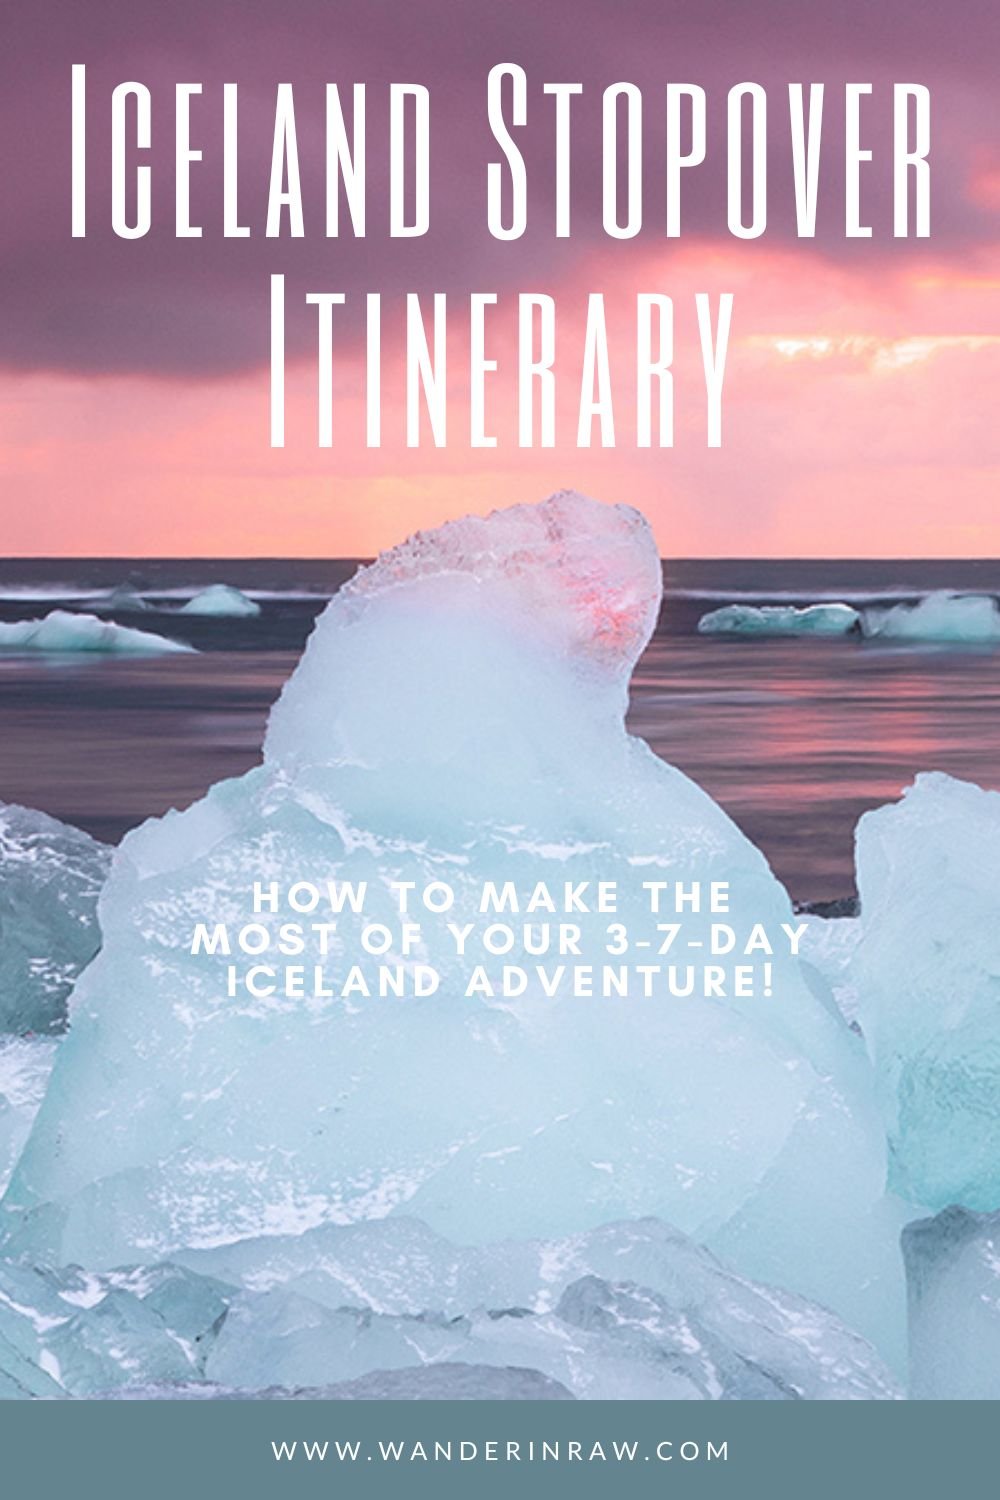 Iceland Stopover Itinerary: Iceland Road Trip Along the South Coast